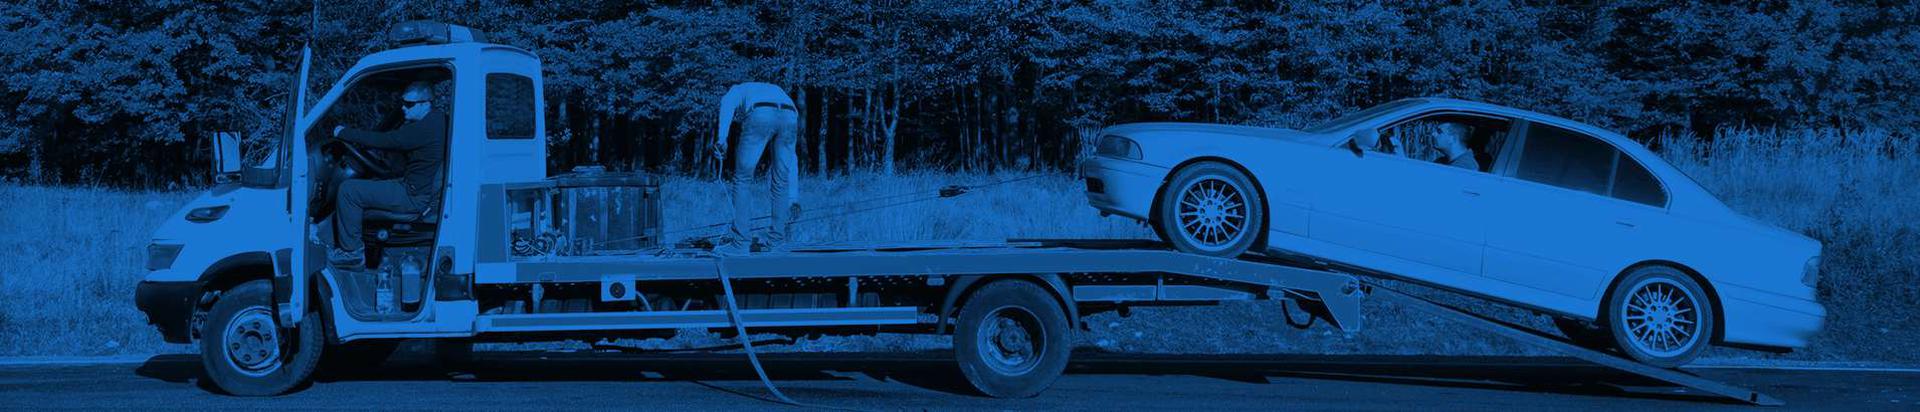 roadside assistance, Car towing, Car transport, towage services, Tug-of-war